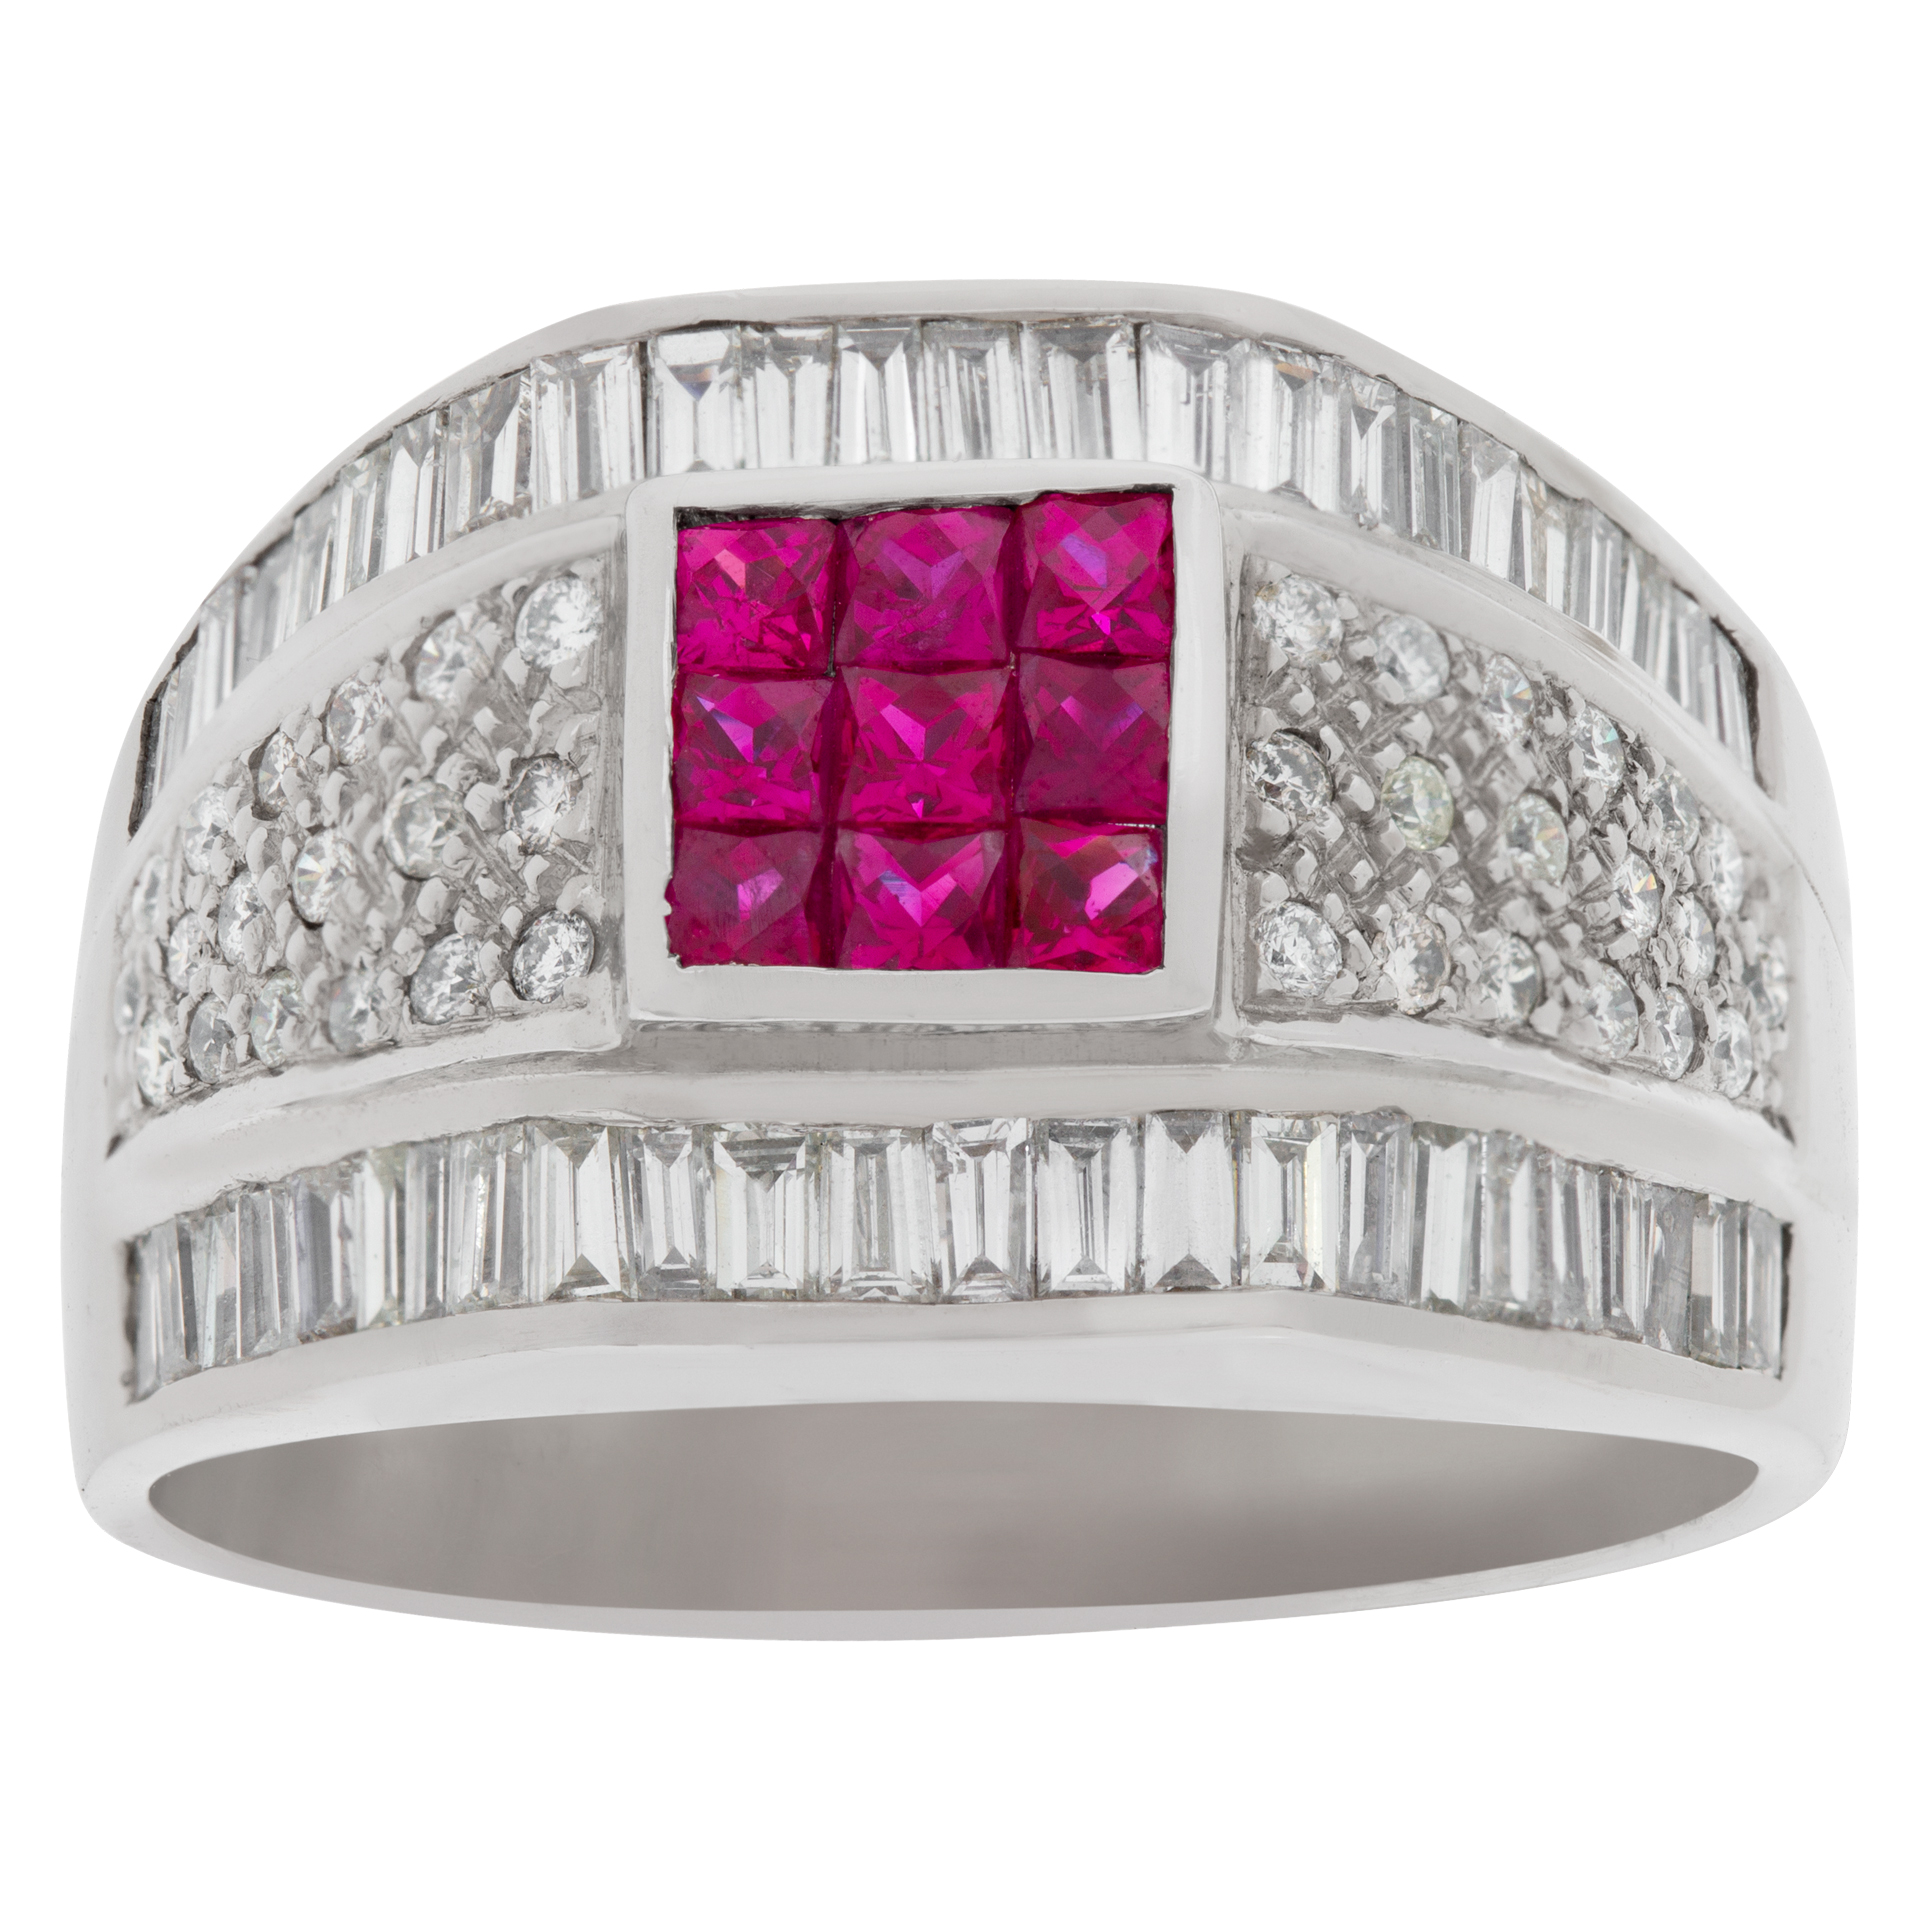 Fancy rubies and diamond ring in 18k white gold. 1.00 carats in diamonds. Size 8.5 image 1